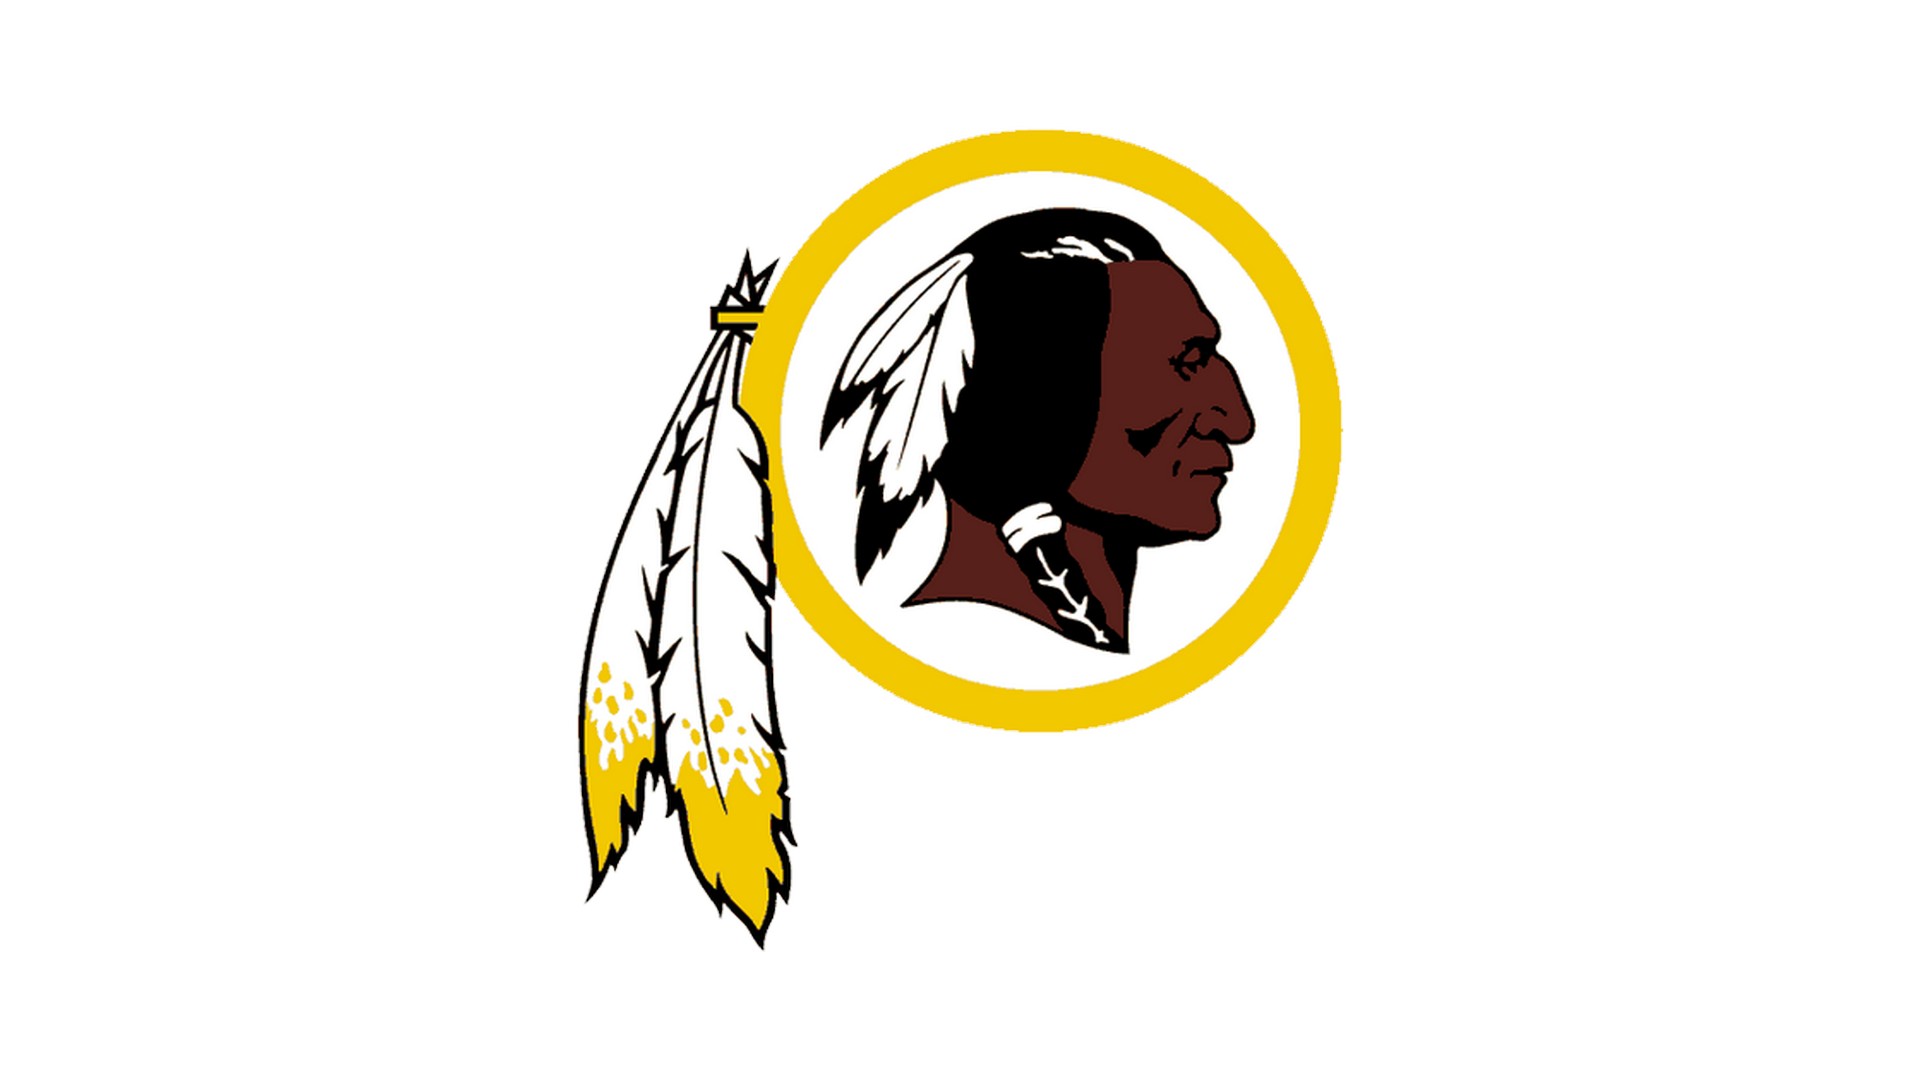 Washington Redskins Laptop Wallpaper with high-resolution 1920x1080 pixel. Download and set as wallpaper for Desktop Computer, Apple iPhone X, XS Max, XR, 8, 7, 6, SE, iPad, Android